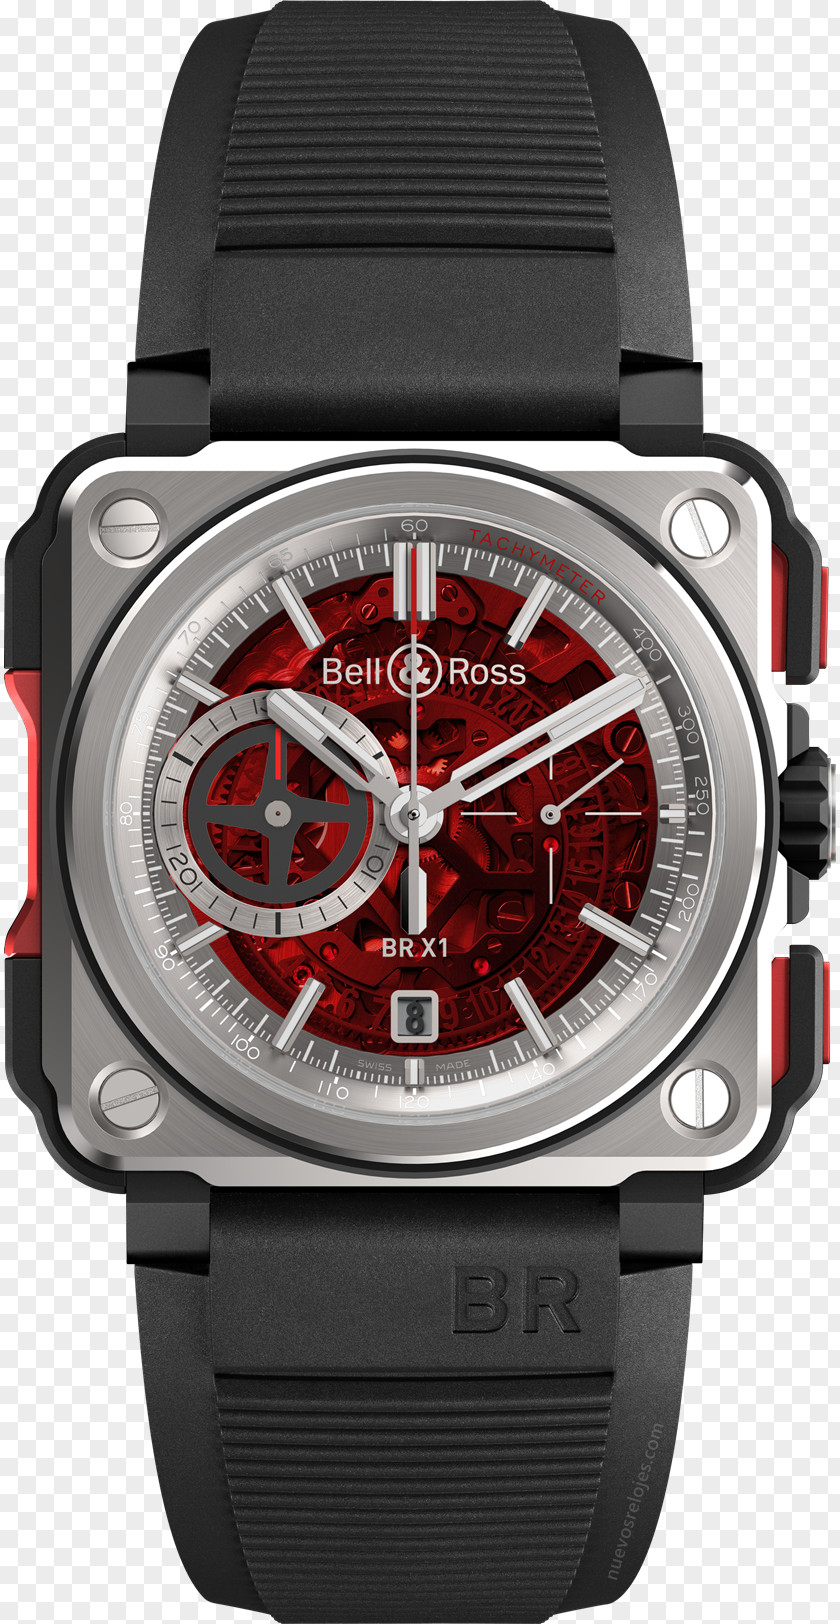 Watch Chronograph Automatic Bell & Ross, Inc. PNG